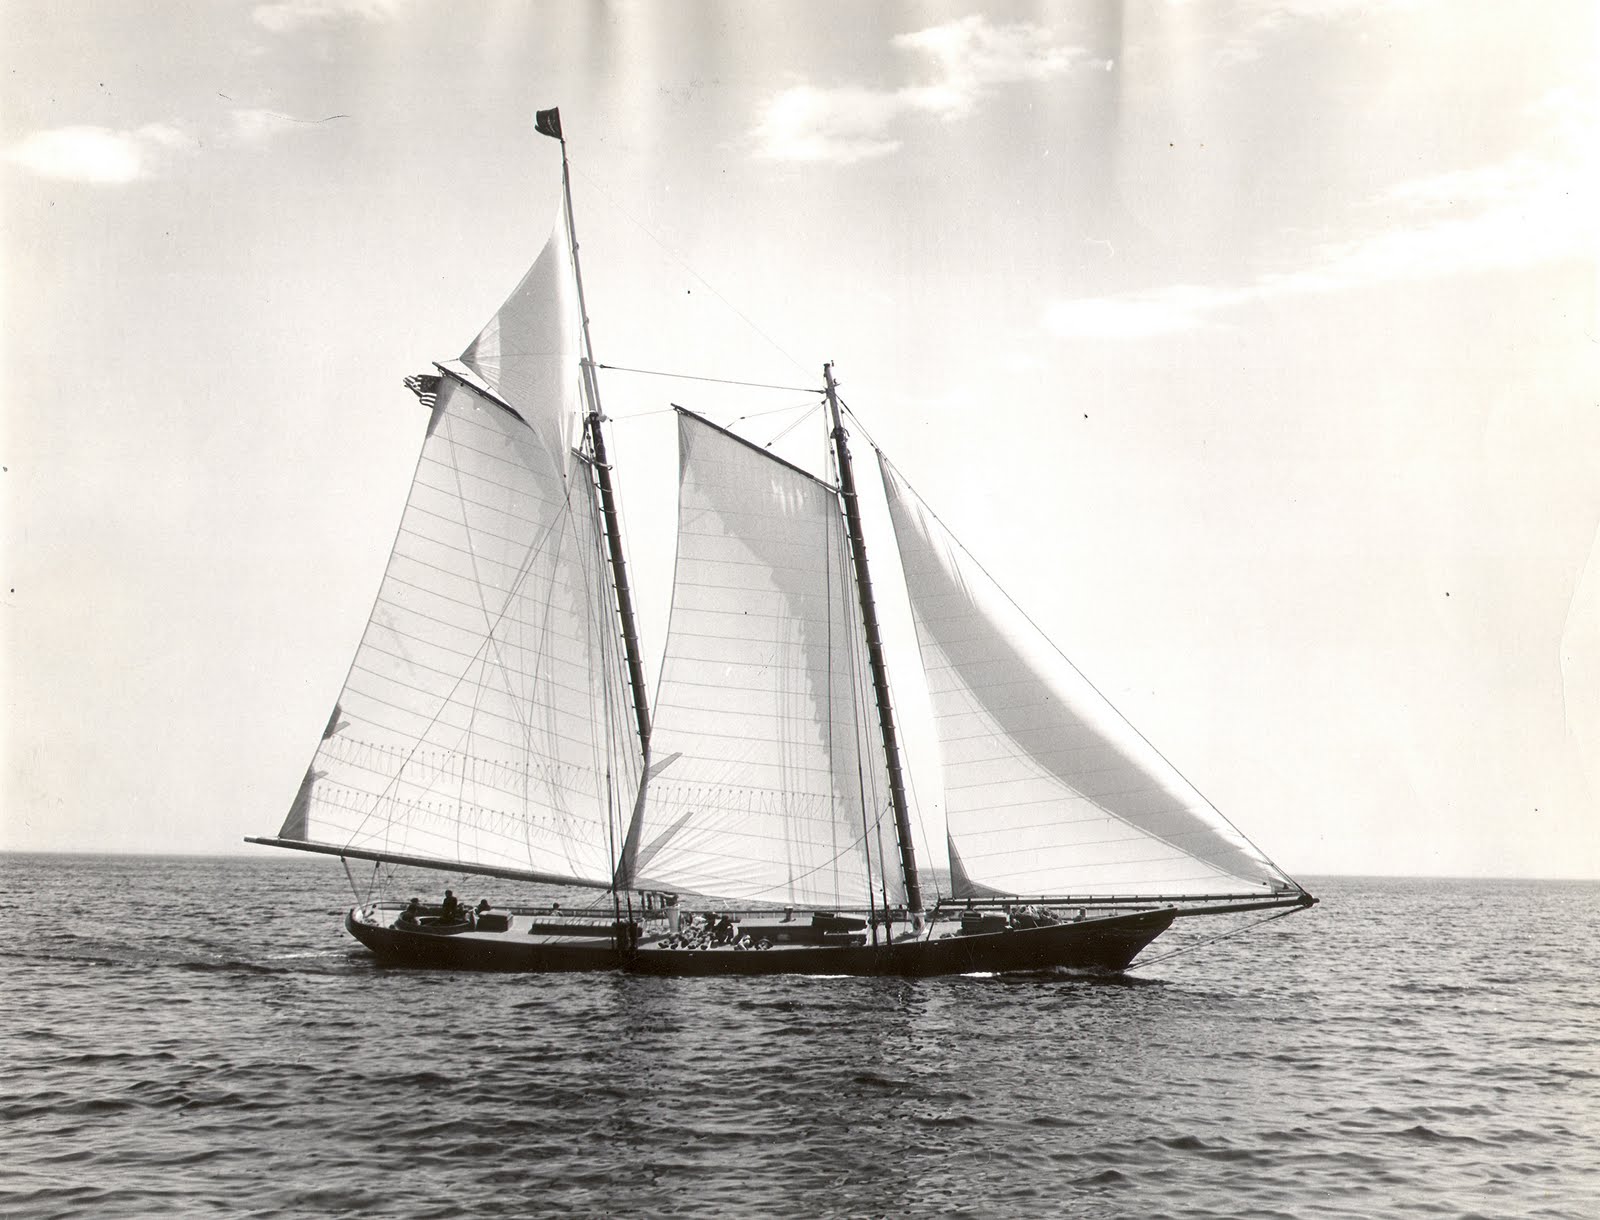 This replica of America was built for Rudolph J. Schaefer, Jr. by Goudy & Stevens Shipyard of Boothbay, Maine on 1967